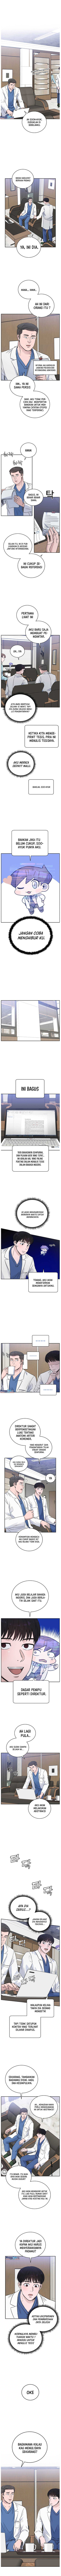 A.I Doctor Chapter 43